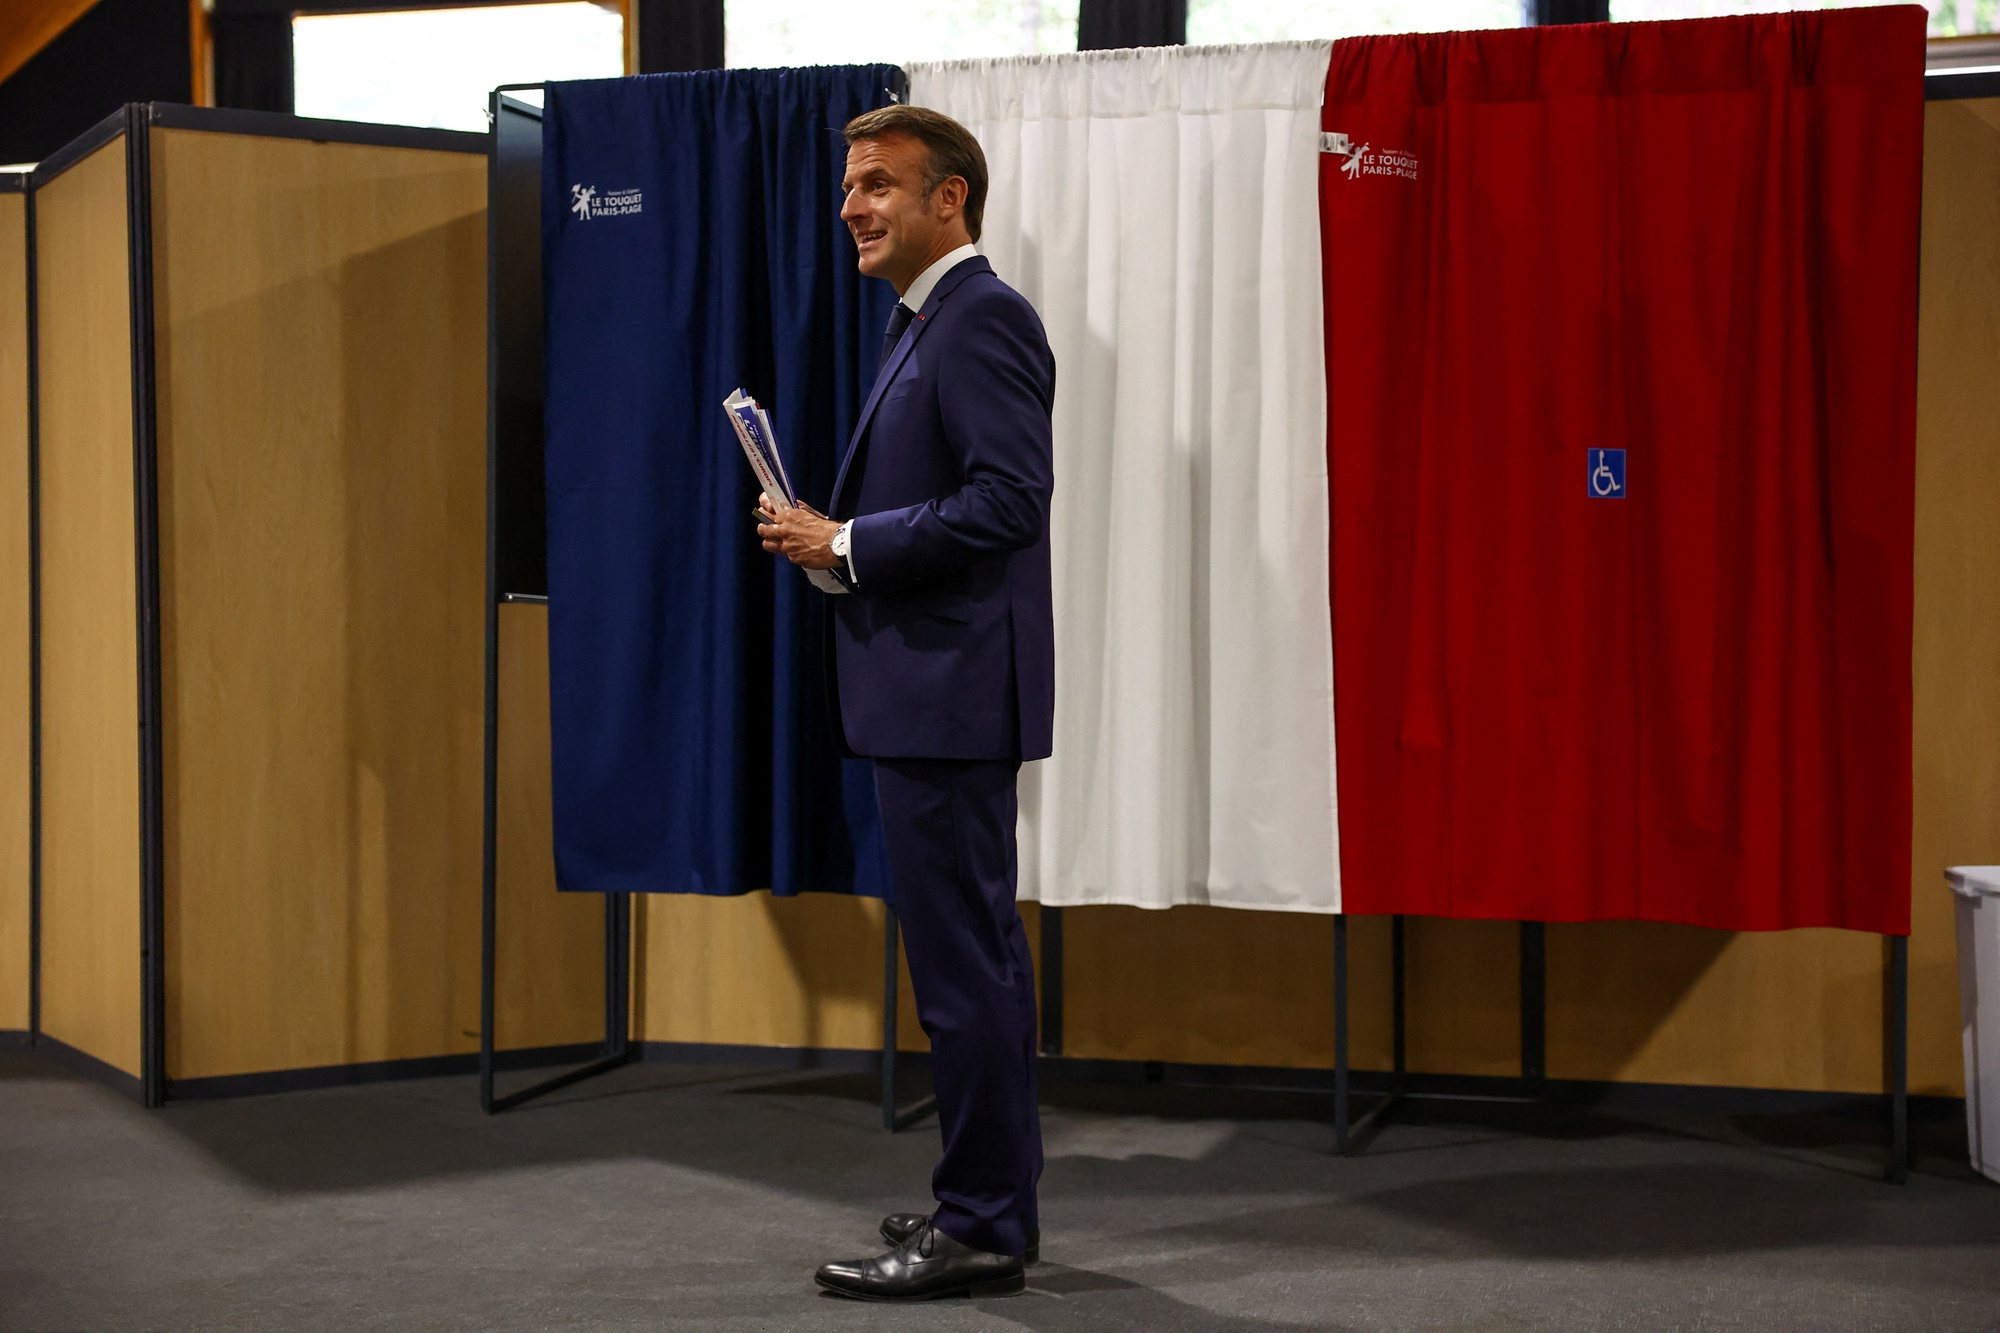 epa11399752 French President Emmanuel Macron stands in front of voting booths during the European Parliament election, at a polling station in Le Touquet-Paris-Plage, France, 09 June 2024.  EPA/Hannah McKay / POOL  MAXPPP OUT